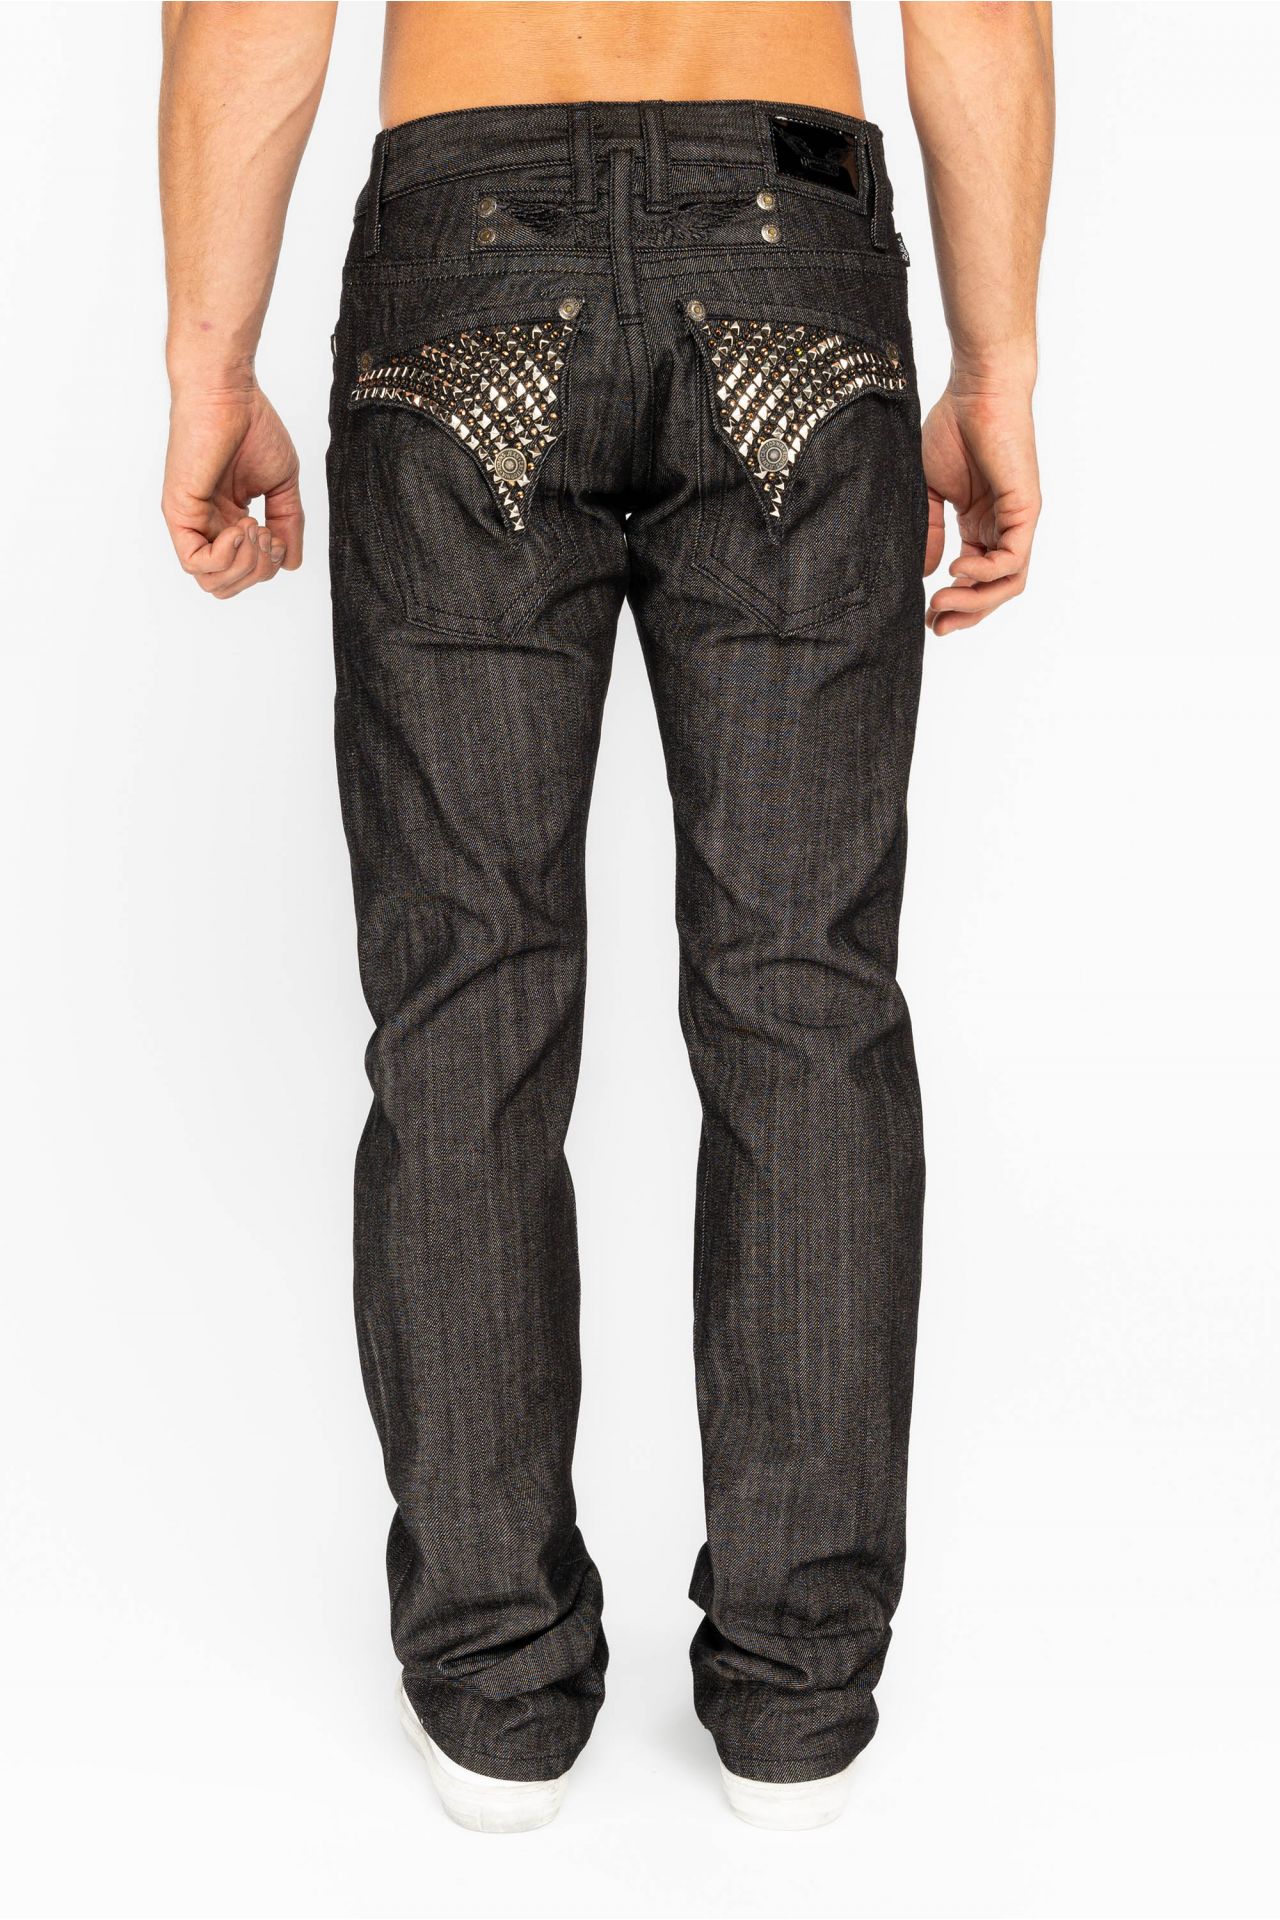 RAW DENIM COLLECTION MENS STRAIGHT LEG LONG FLAP JEANS WITH CRYSTALS